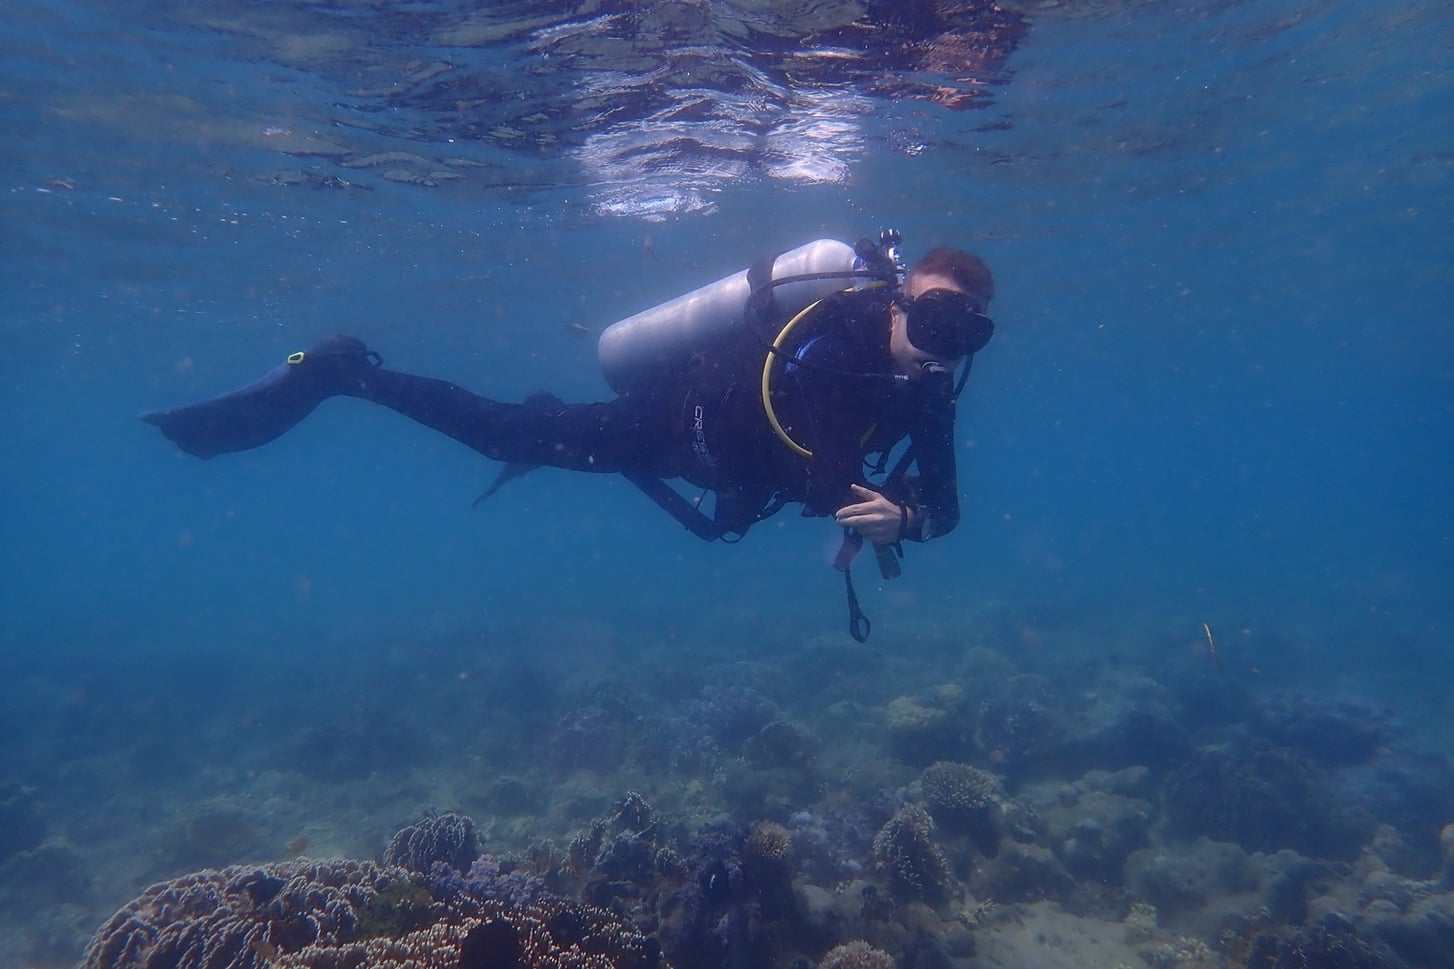 Photo: A Diver as part of Sorce’s underwater research team